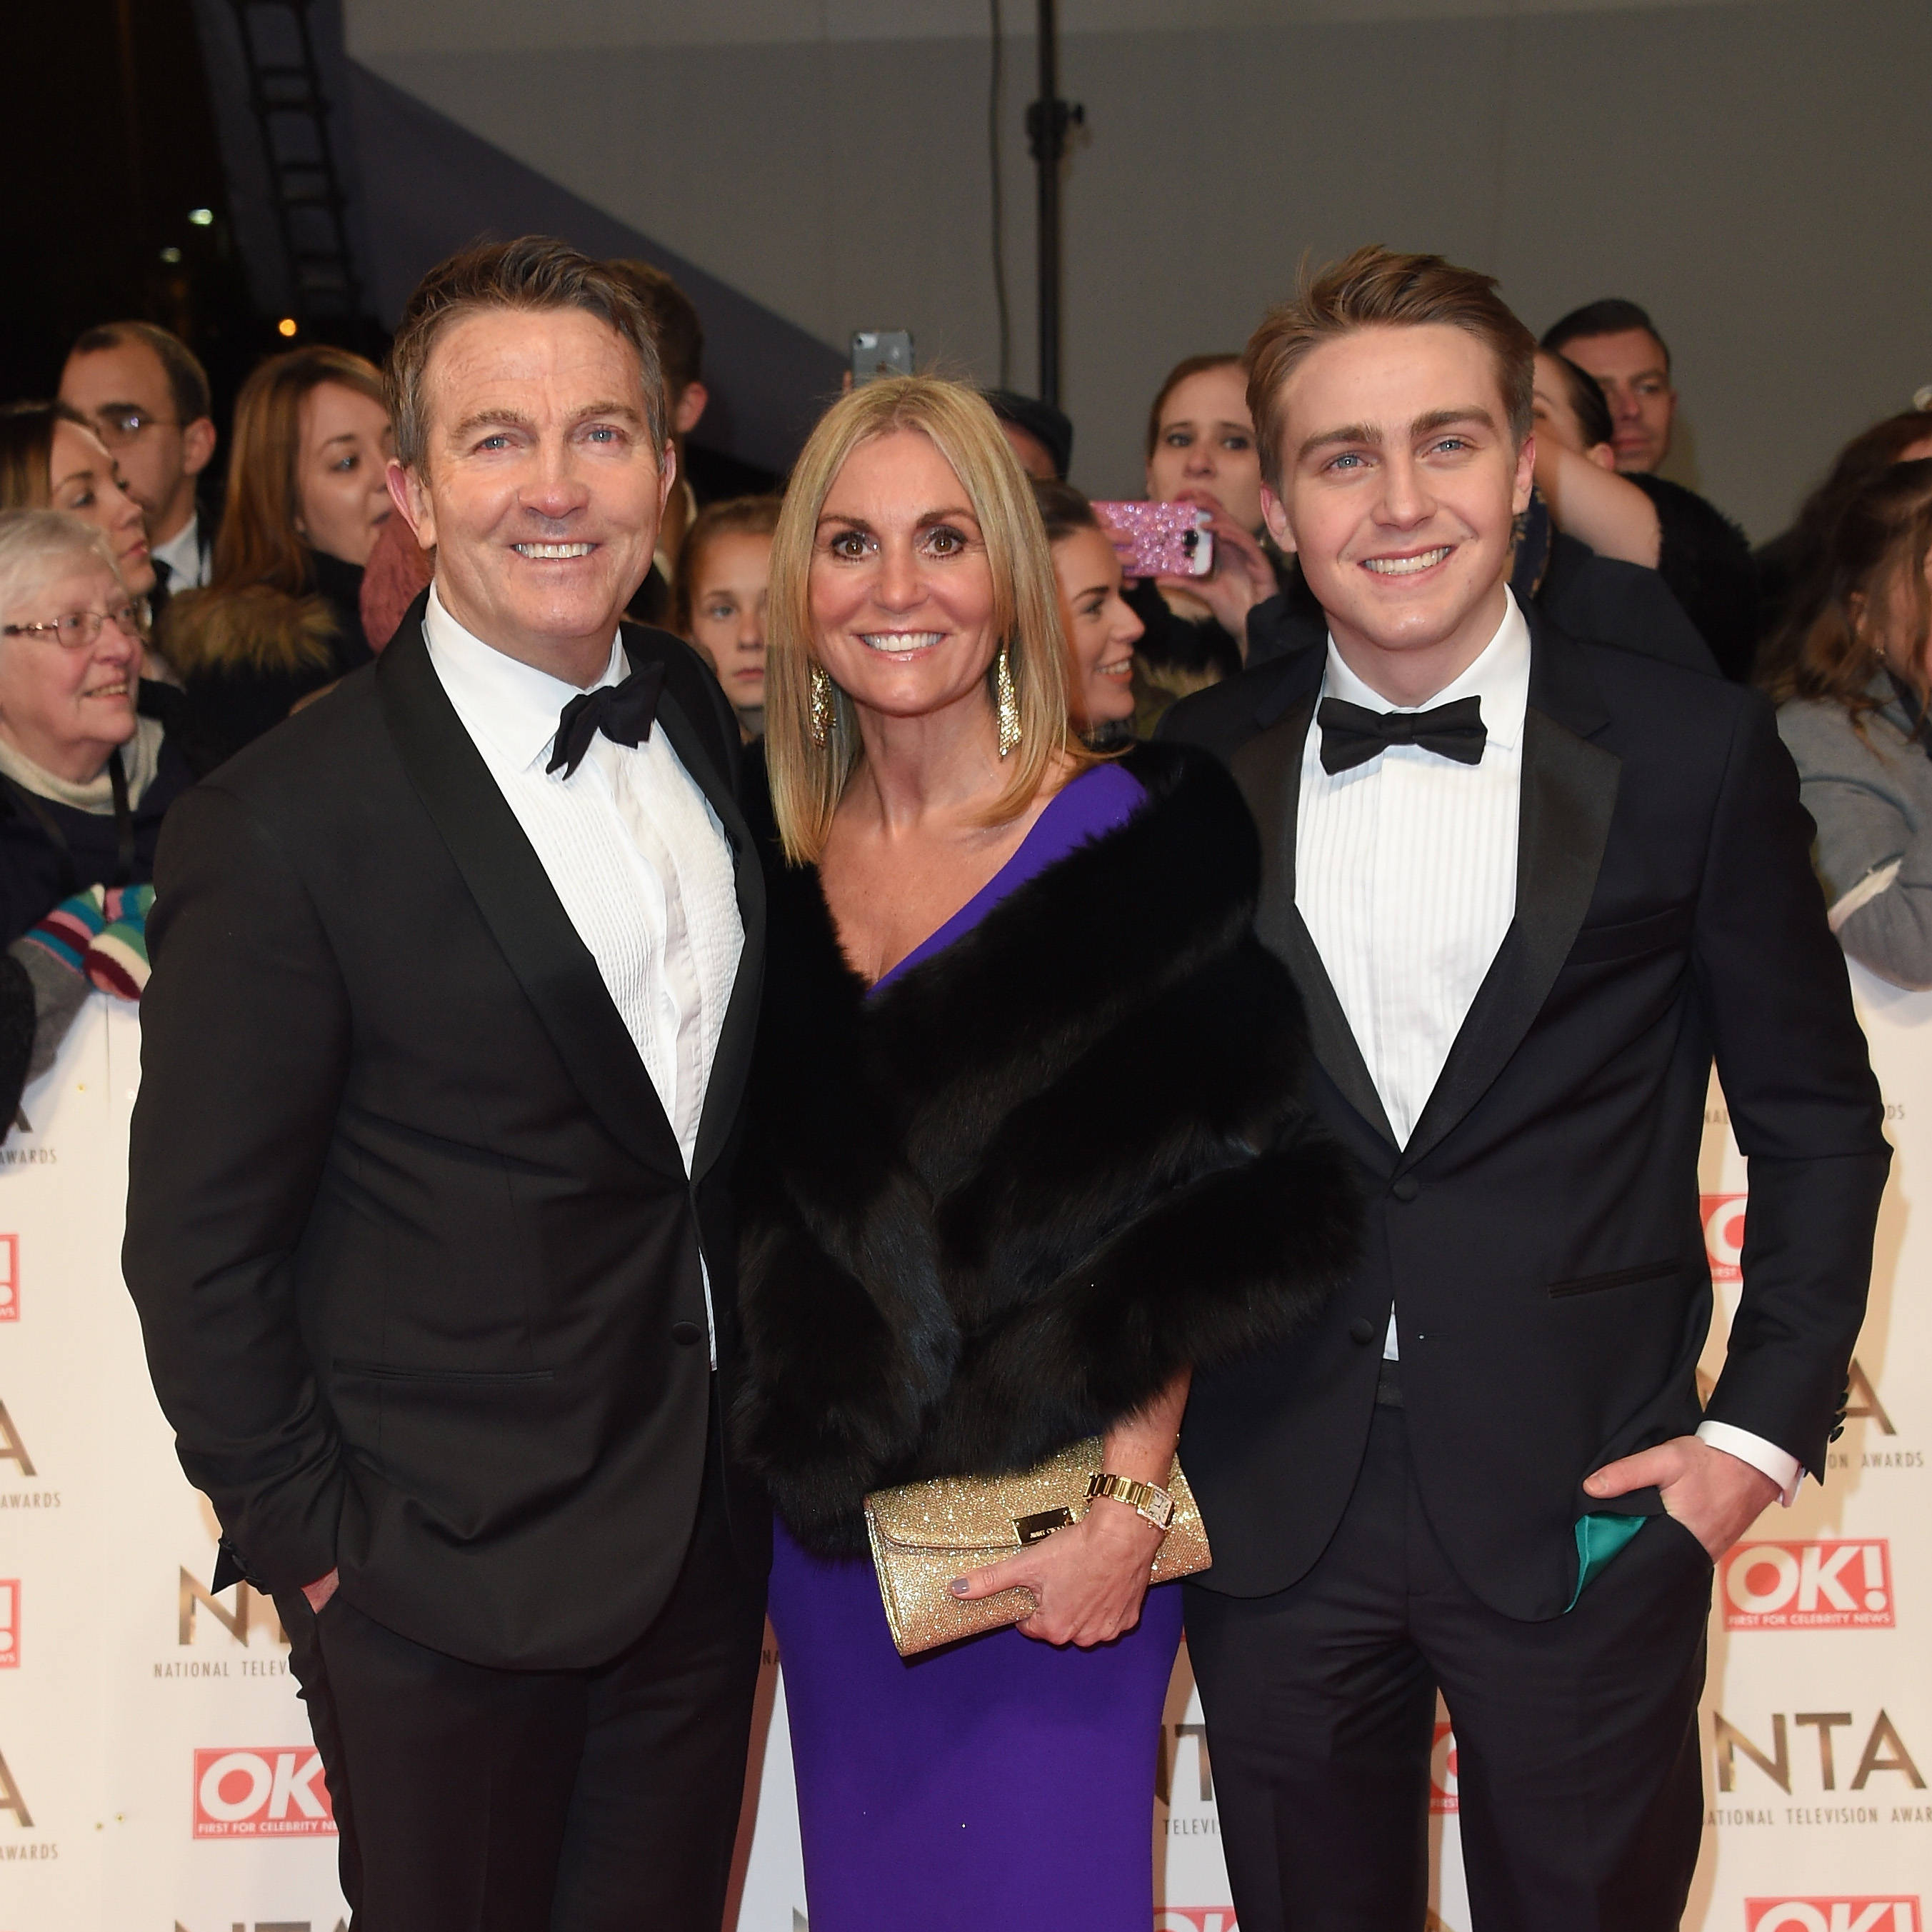 Bradley Walsh with his Wife and Son - Heart Radio